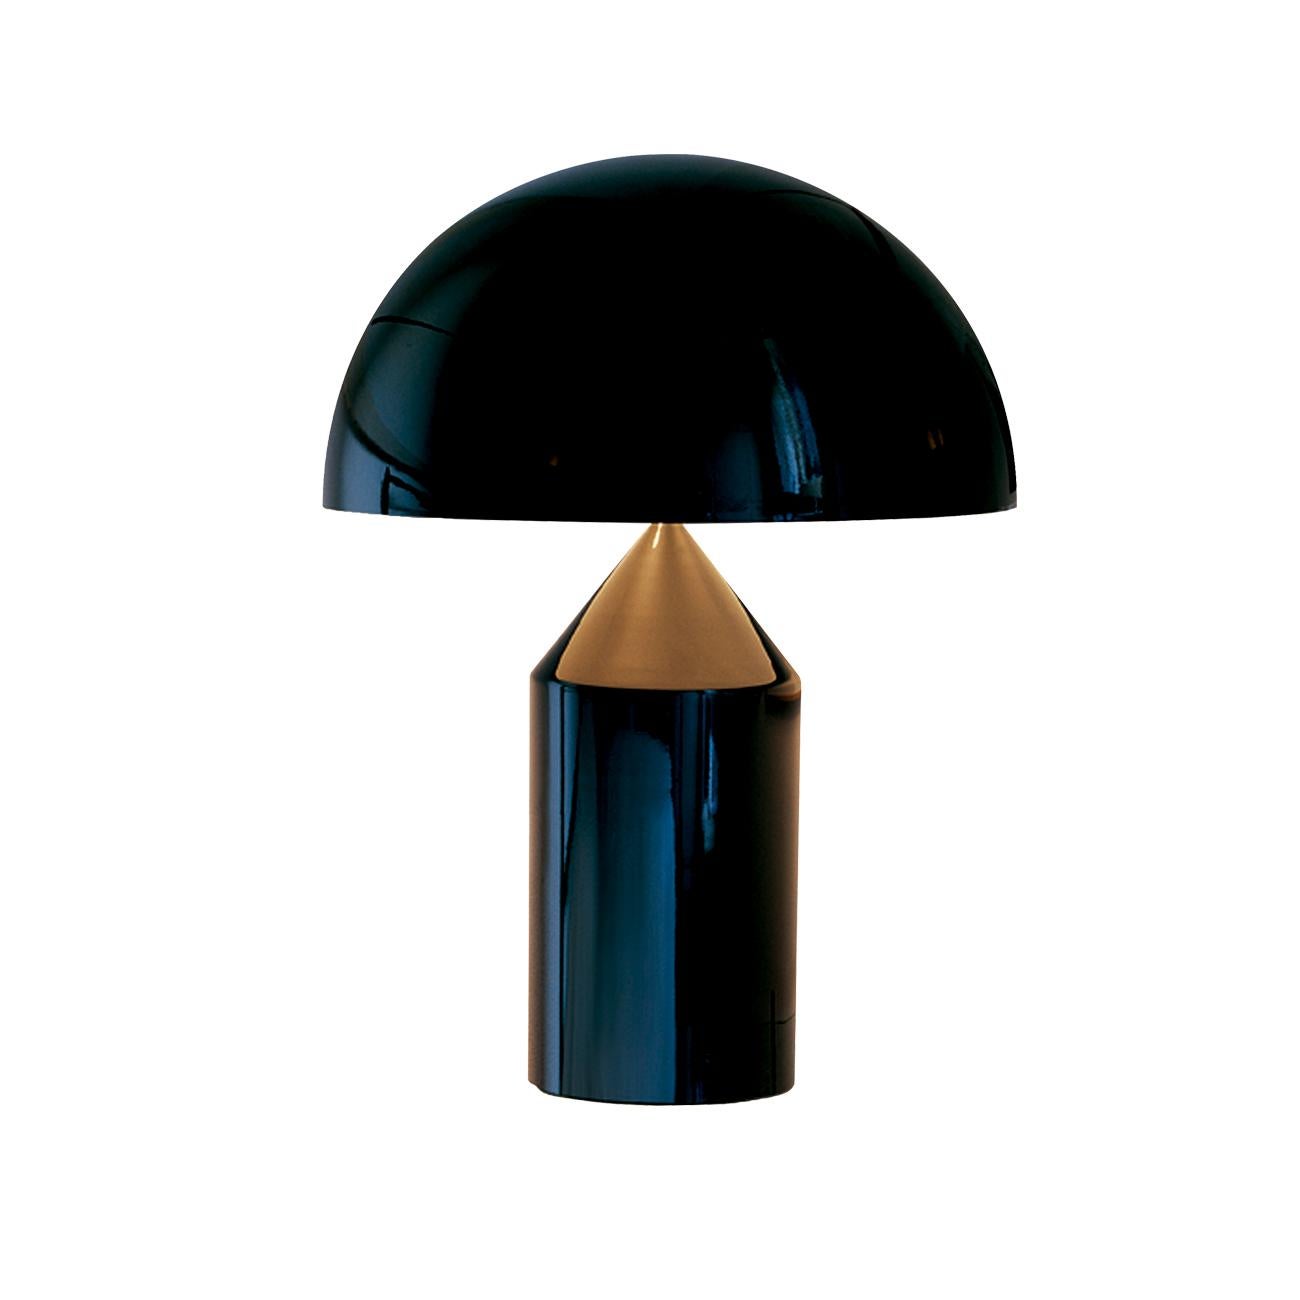 Mid-Century Modern Set of 'Atollo' Large and Small Black Table Lamp by Vico Magistretti for Oluce